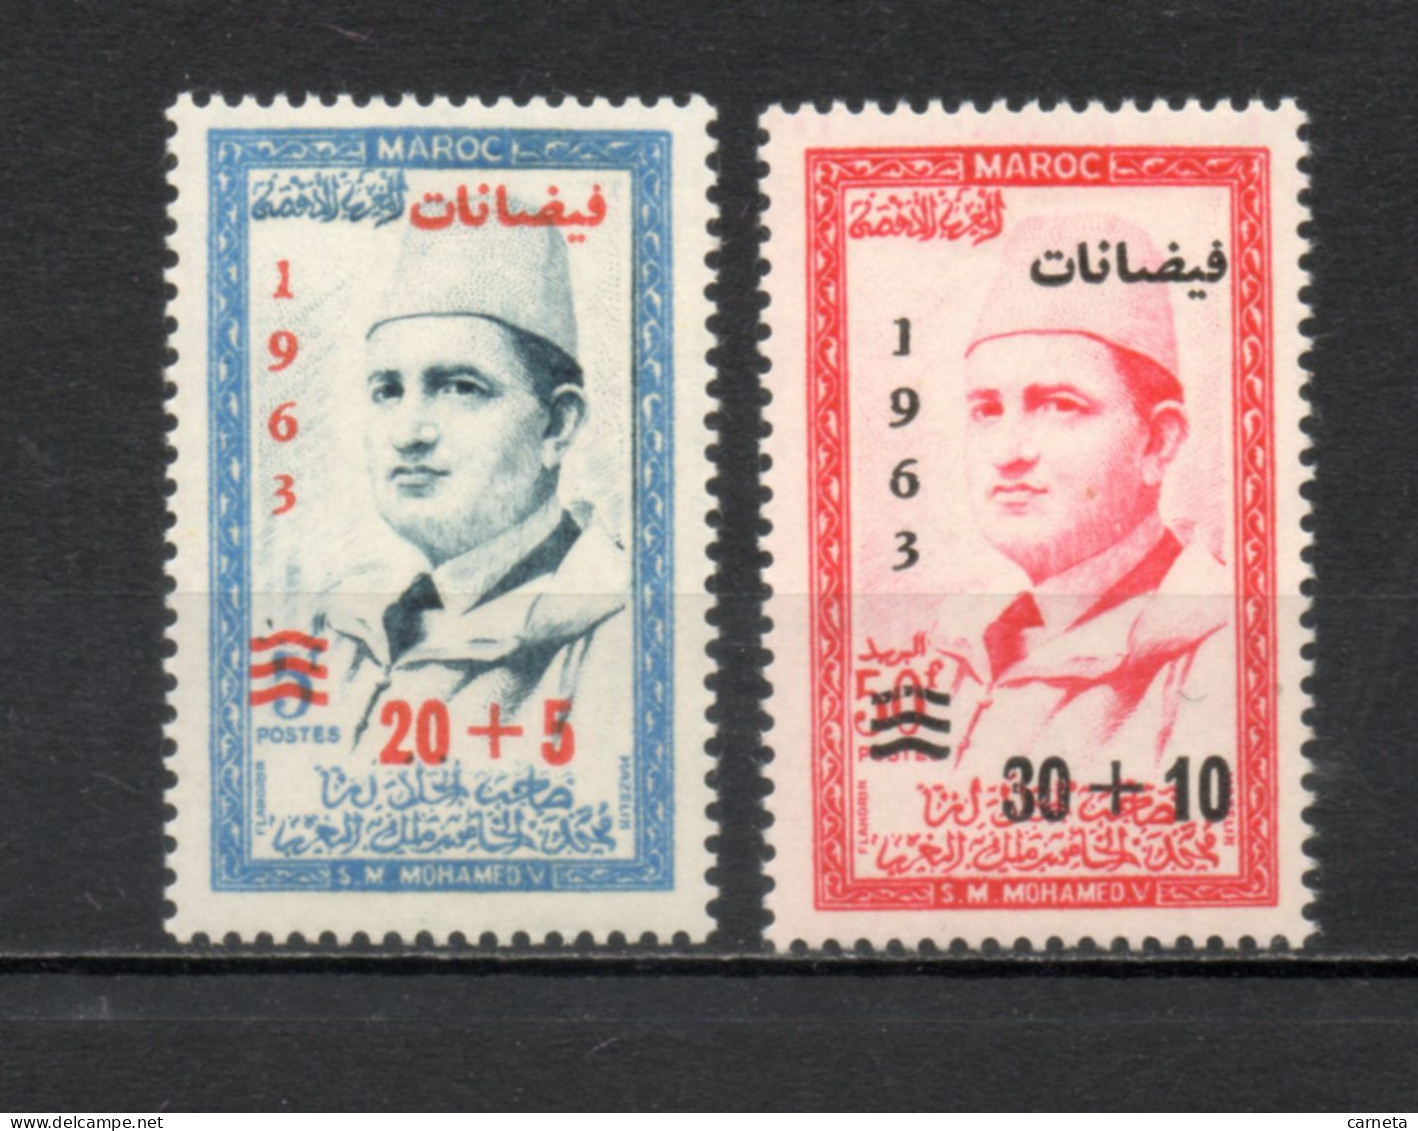 MAROC N°  453 + 454    NEUFS SANS CHARNIERE  COTE 2.60€    MOHAMED V SURCHARGE INONDATIONS - Morocco (1956-...)